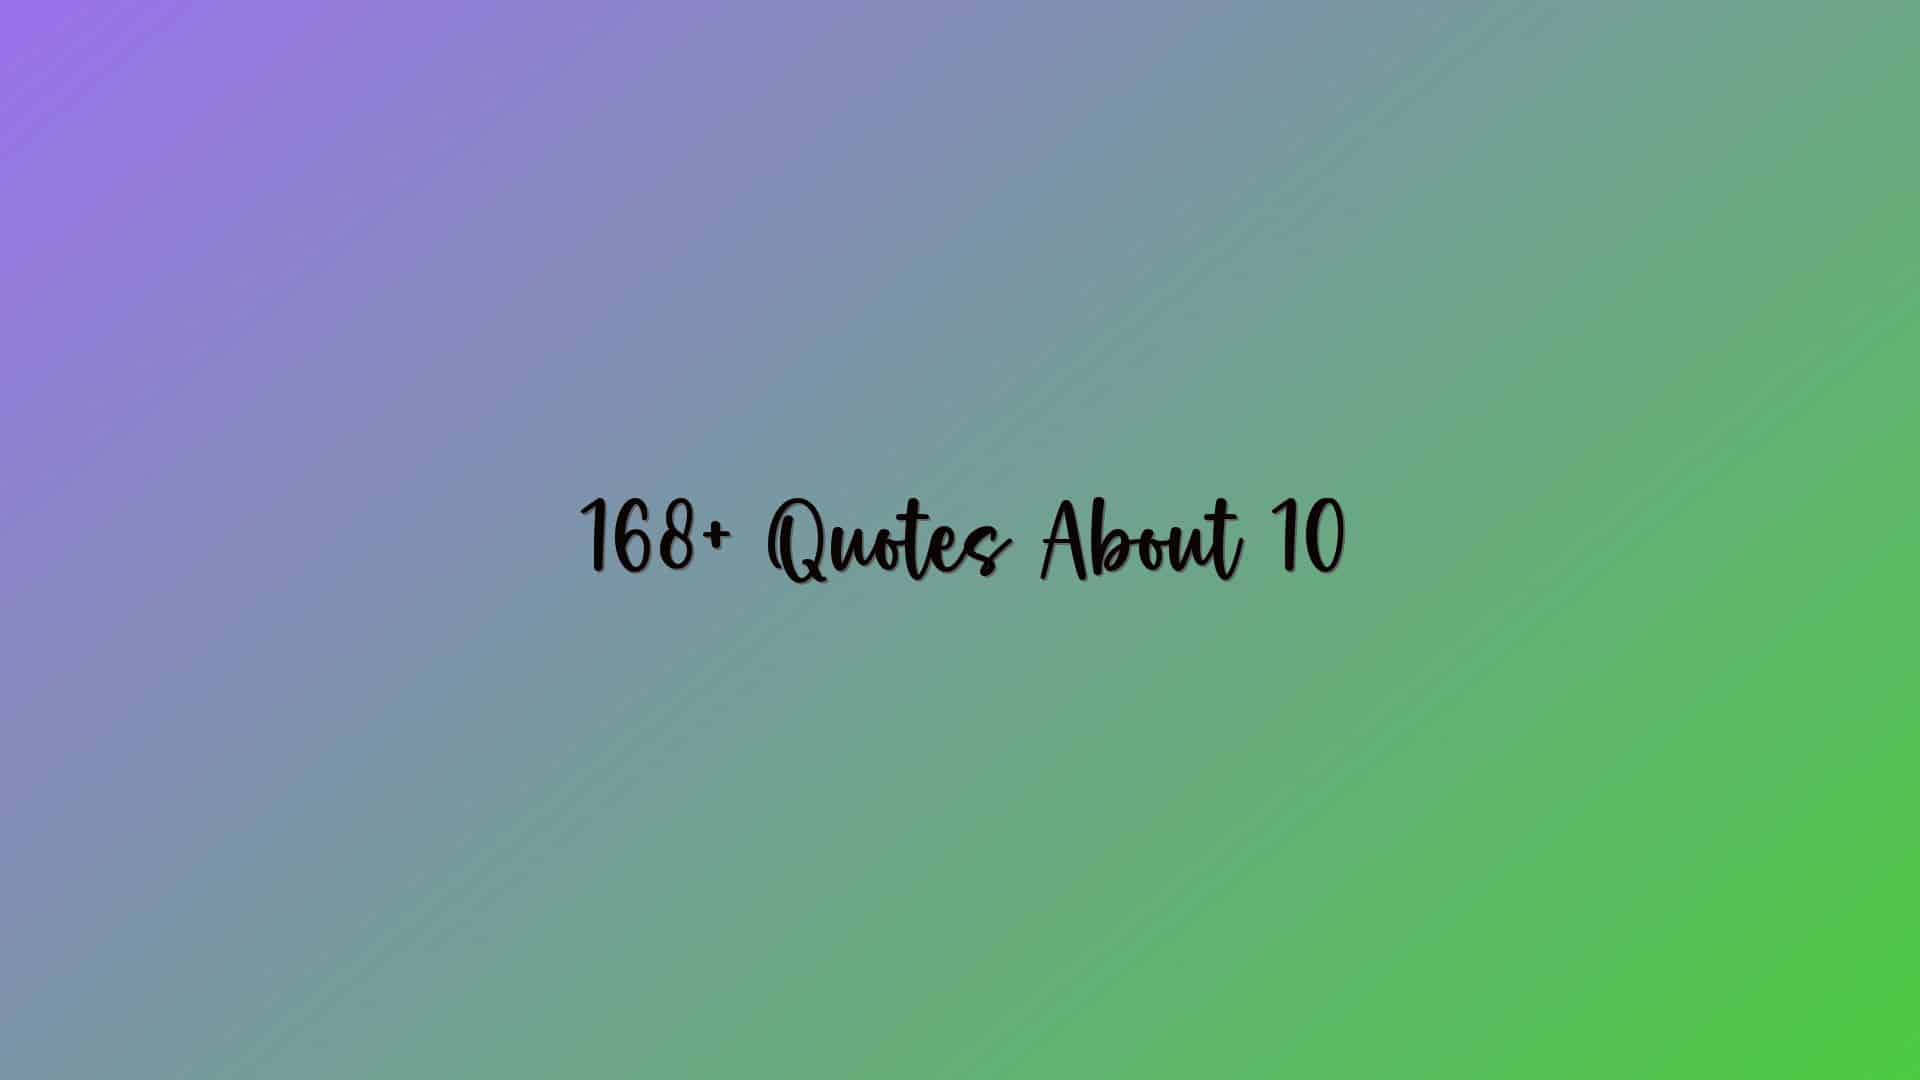 168+ Quotes About 10